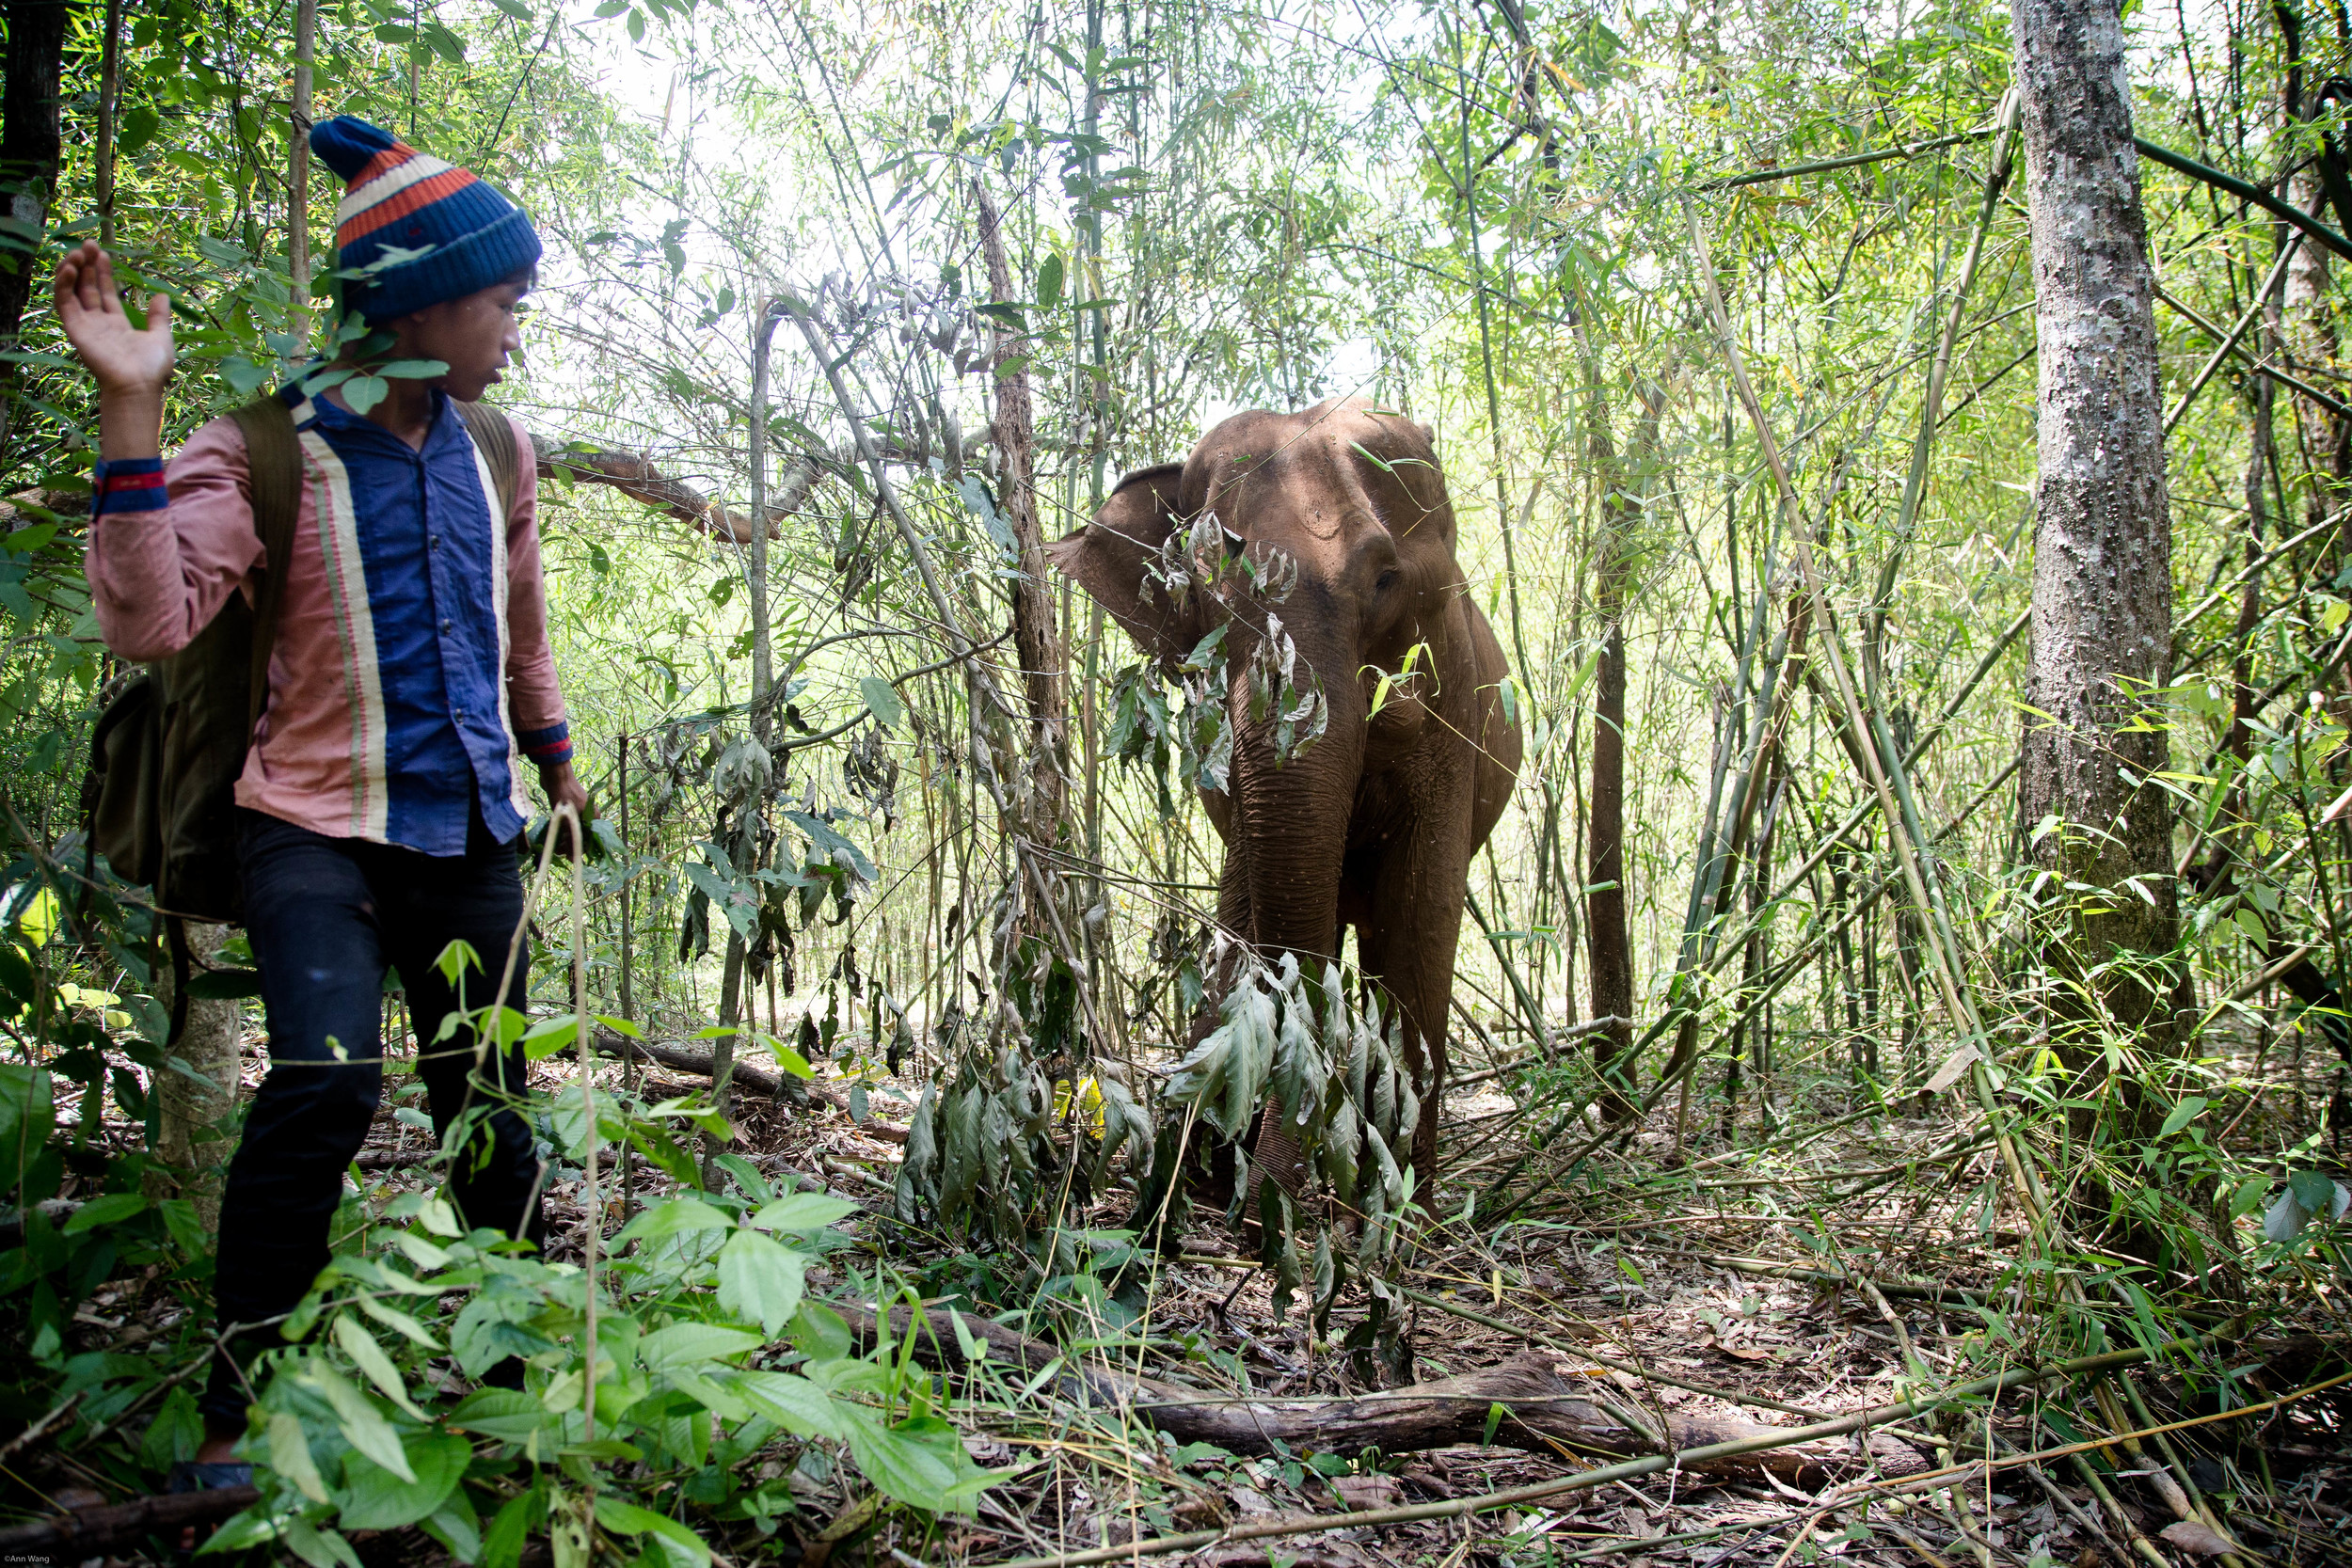  "The Mondulkiri Project" -Protecting the land from logging. Renting the elephant from the aboriginal village. Let the elephant walk freely in the protected land. Train aborigines to take care of the elephant or became a guide for "The Mondulkiri Pro